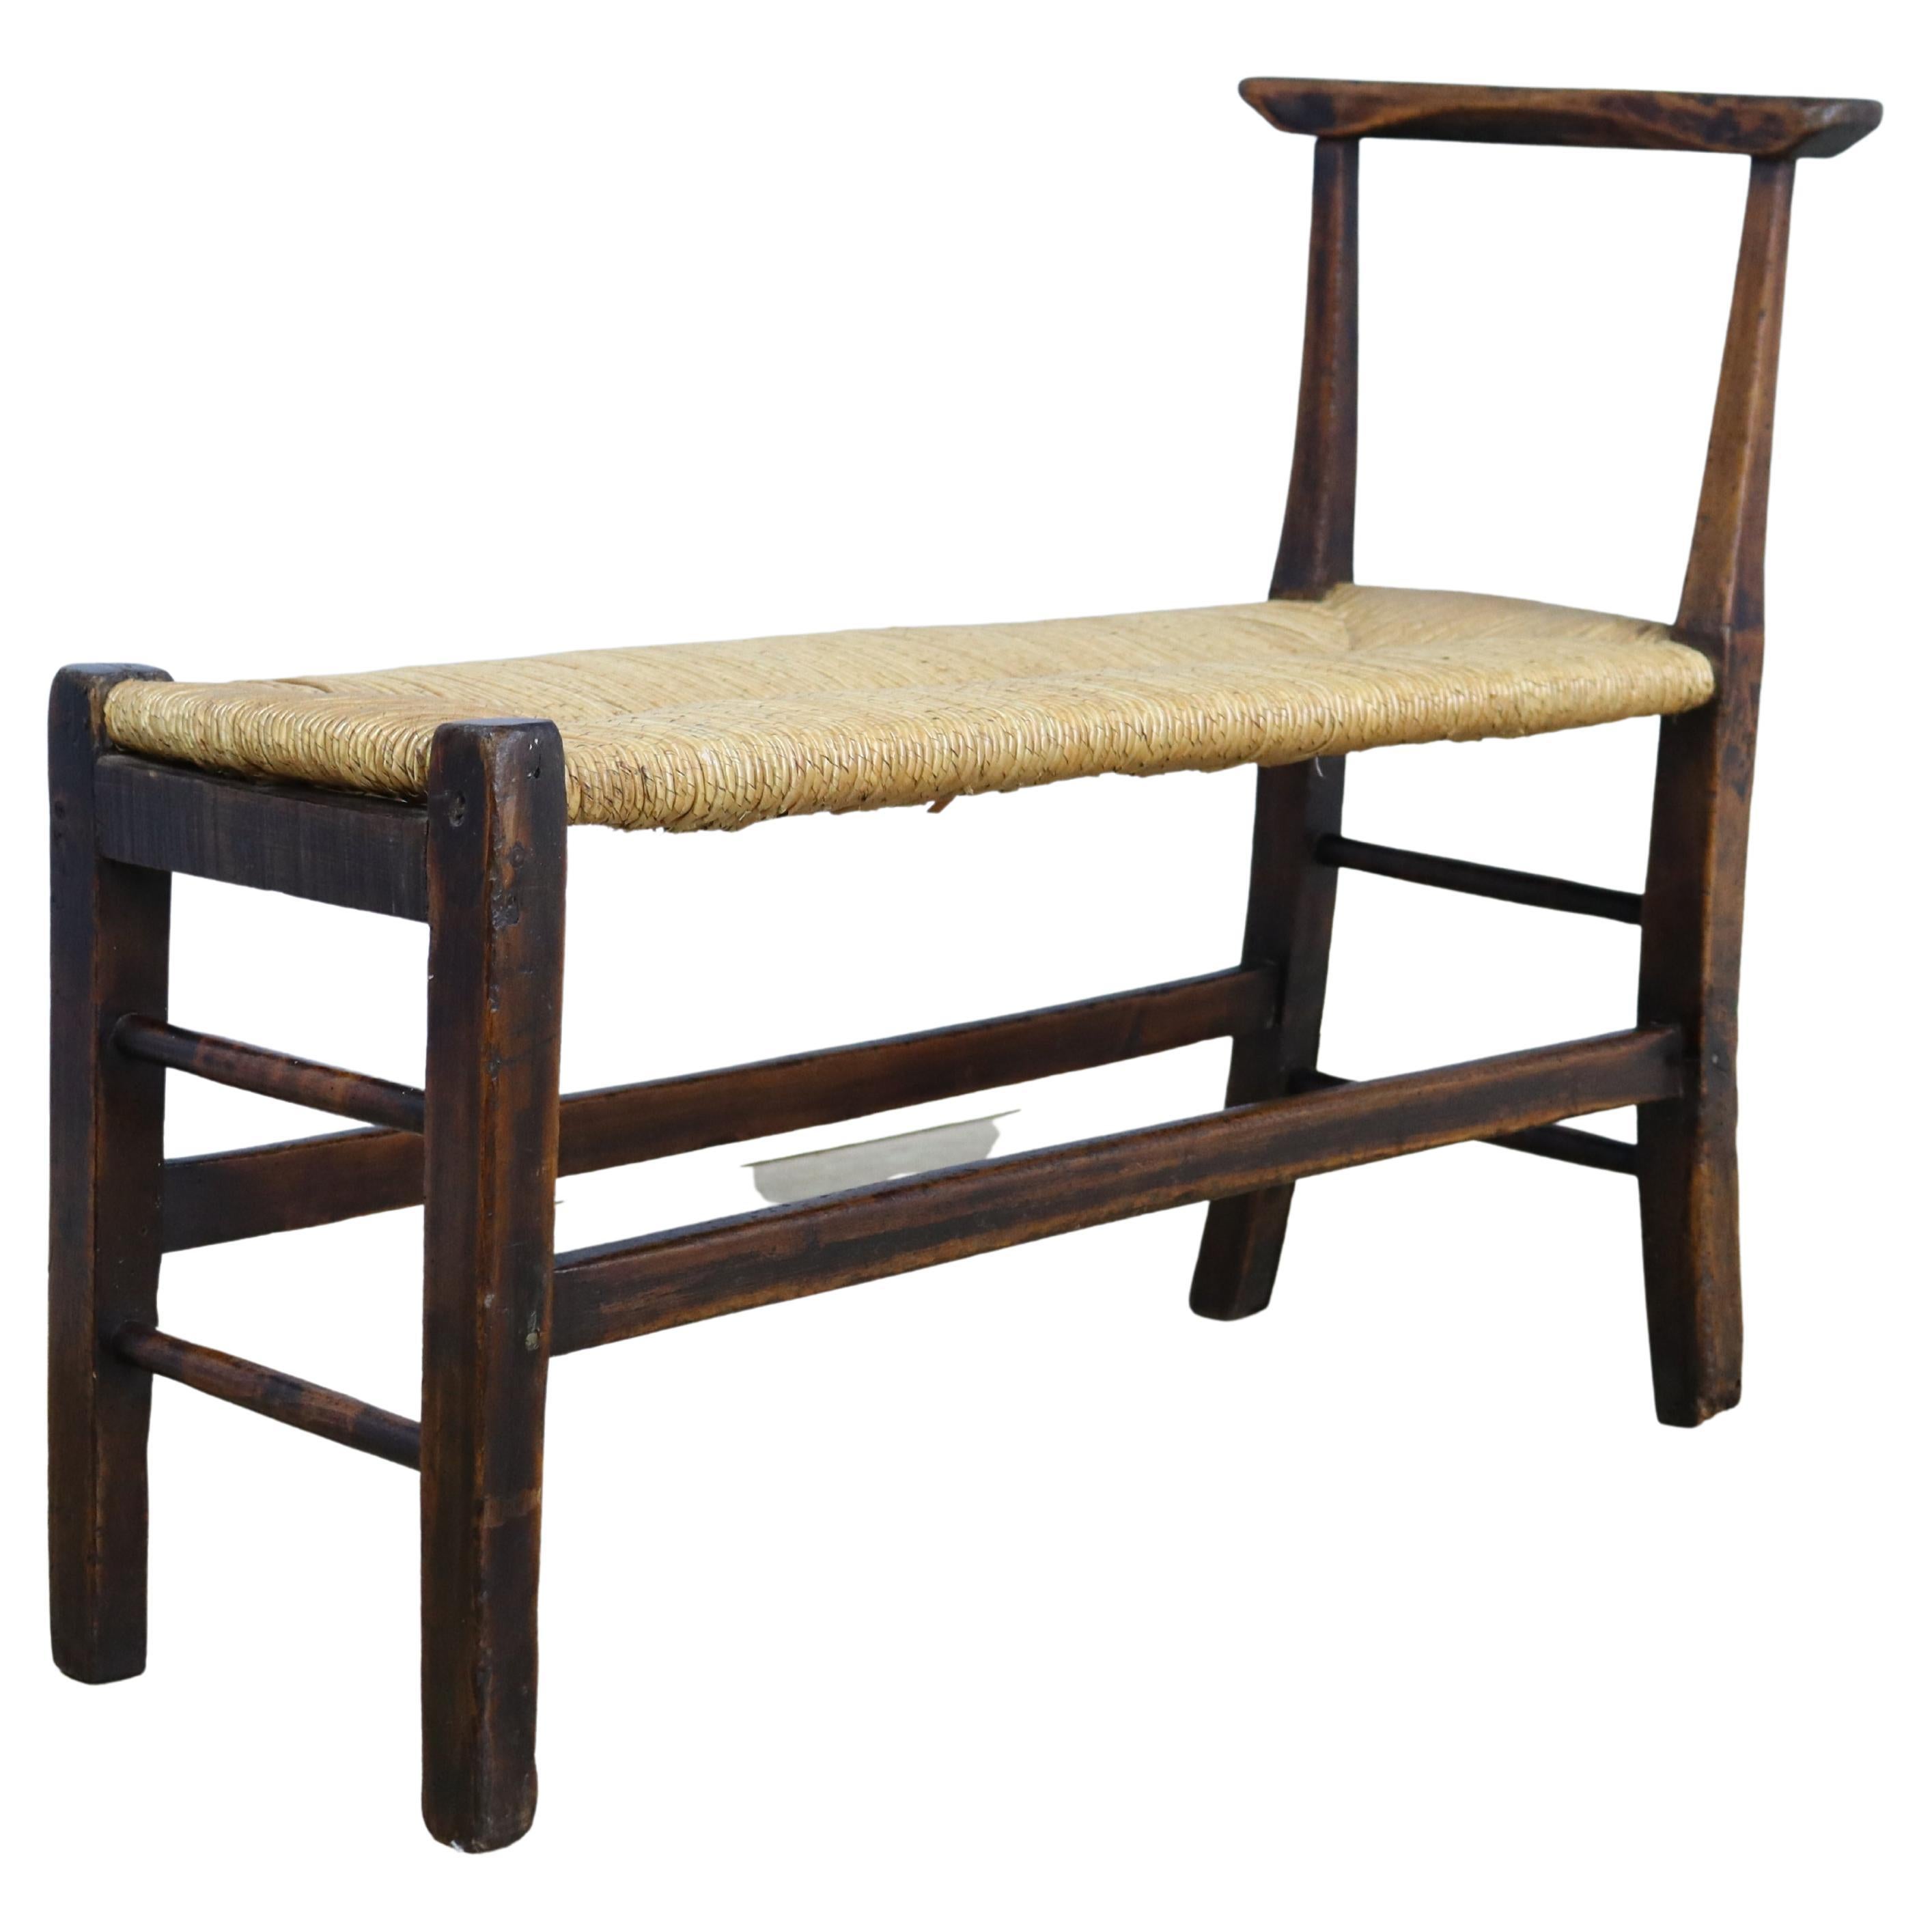 Antique Rush Seated Stool with One Arm